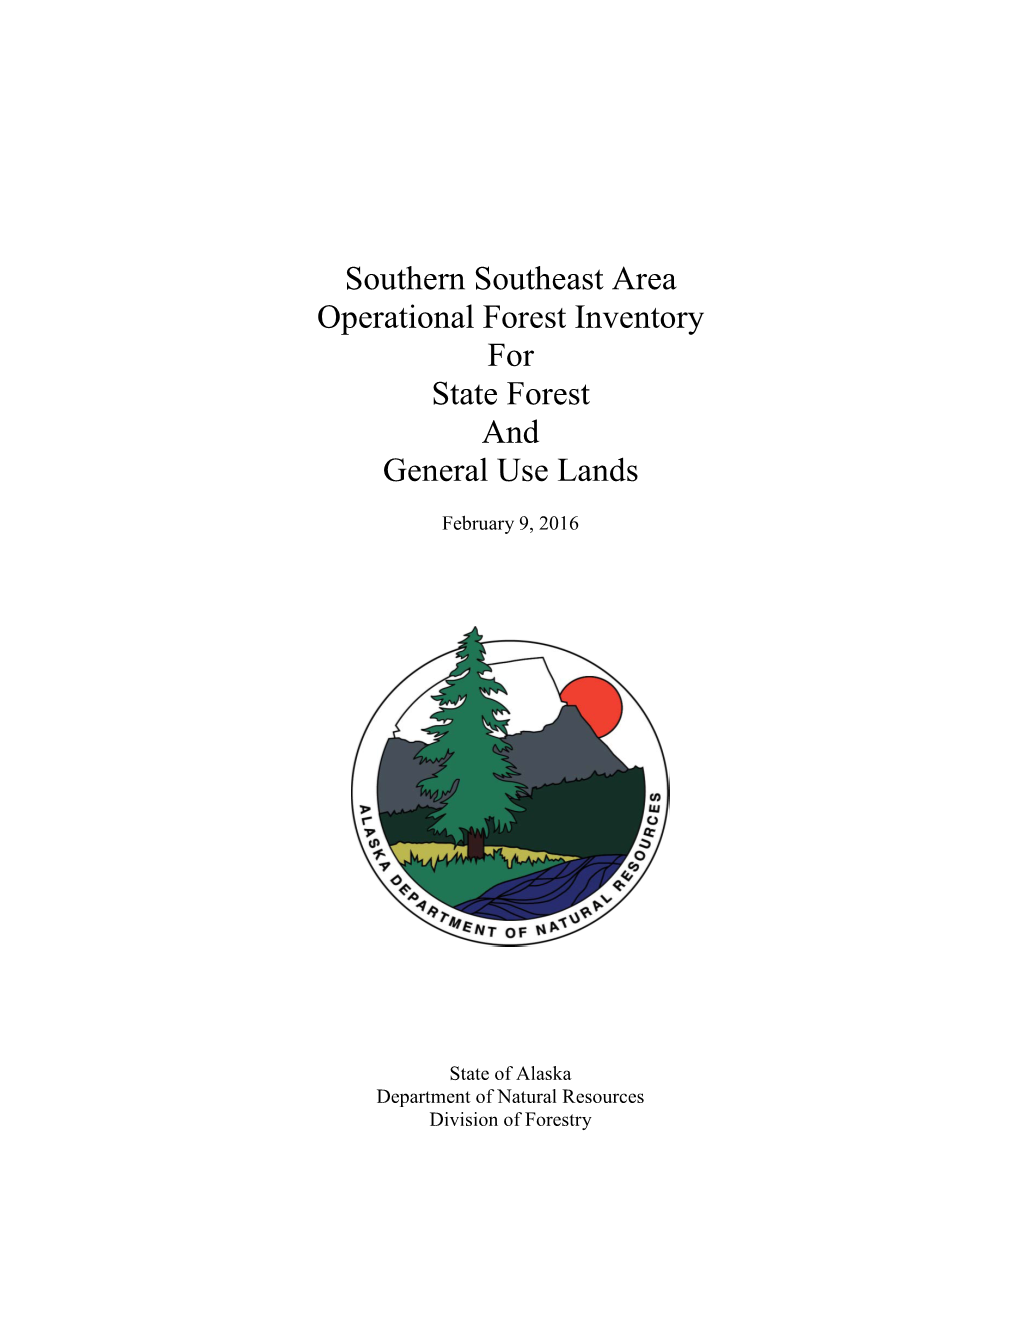 Southern Southeast Area Operational Forest Inventory for State Forest and General Use Lands